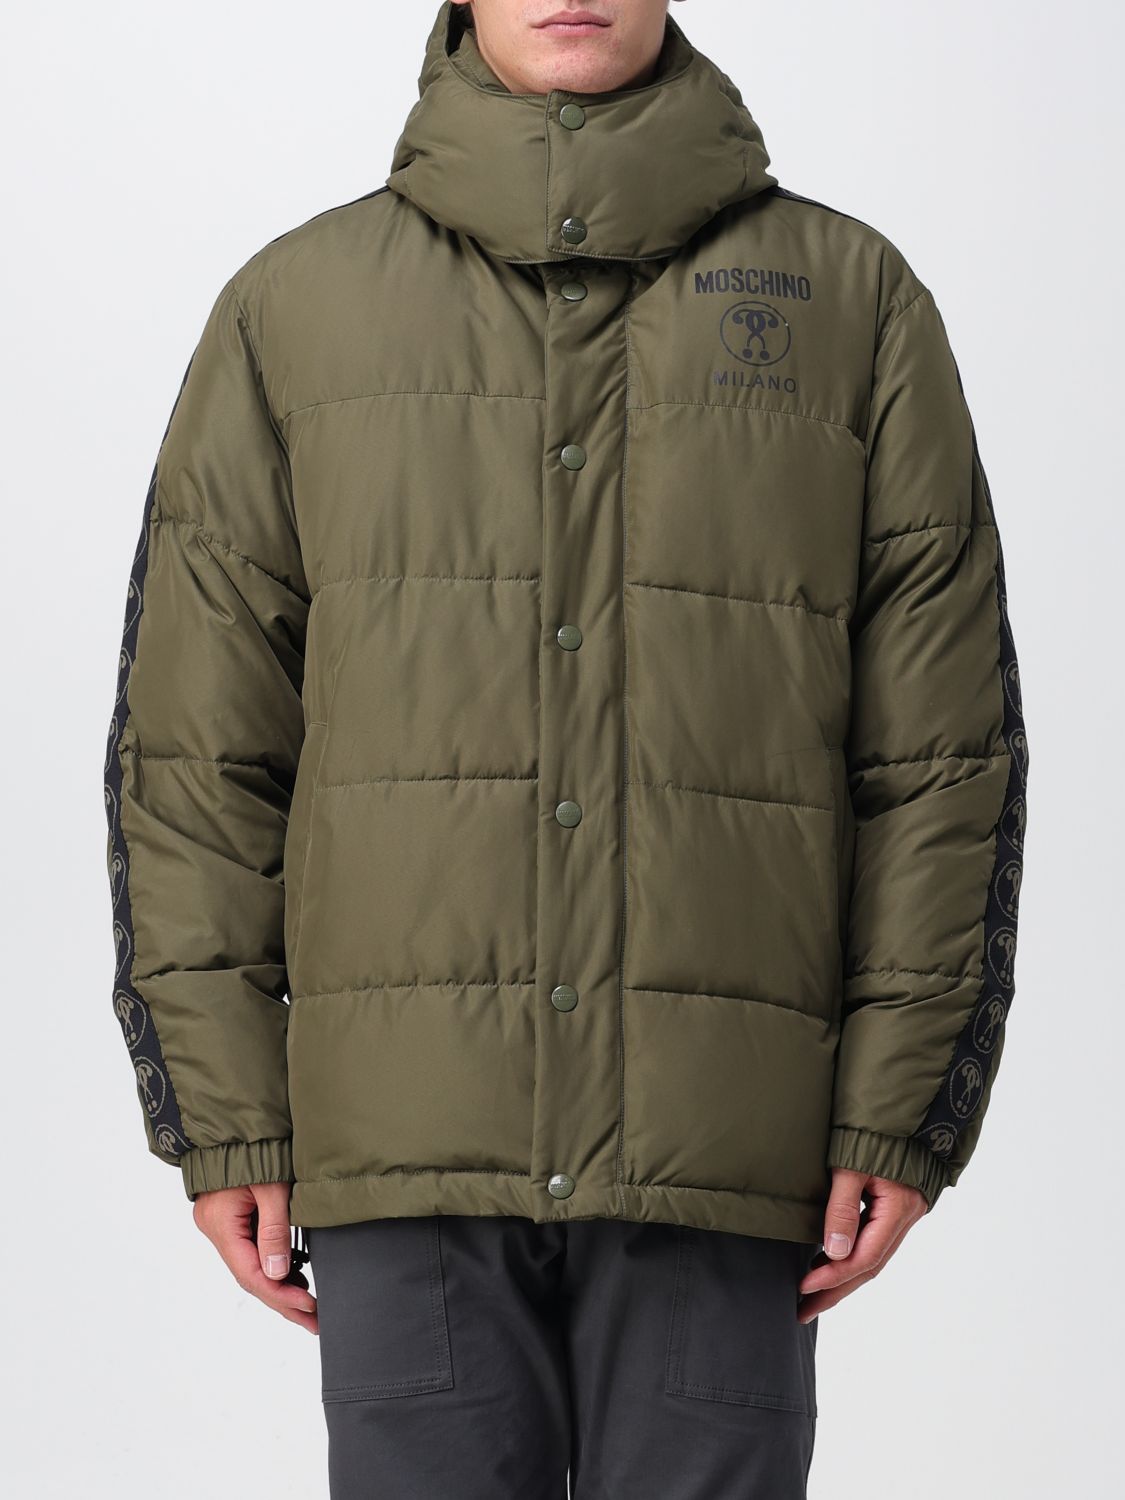 Moschino Couture Jacket  Men Color Green